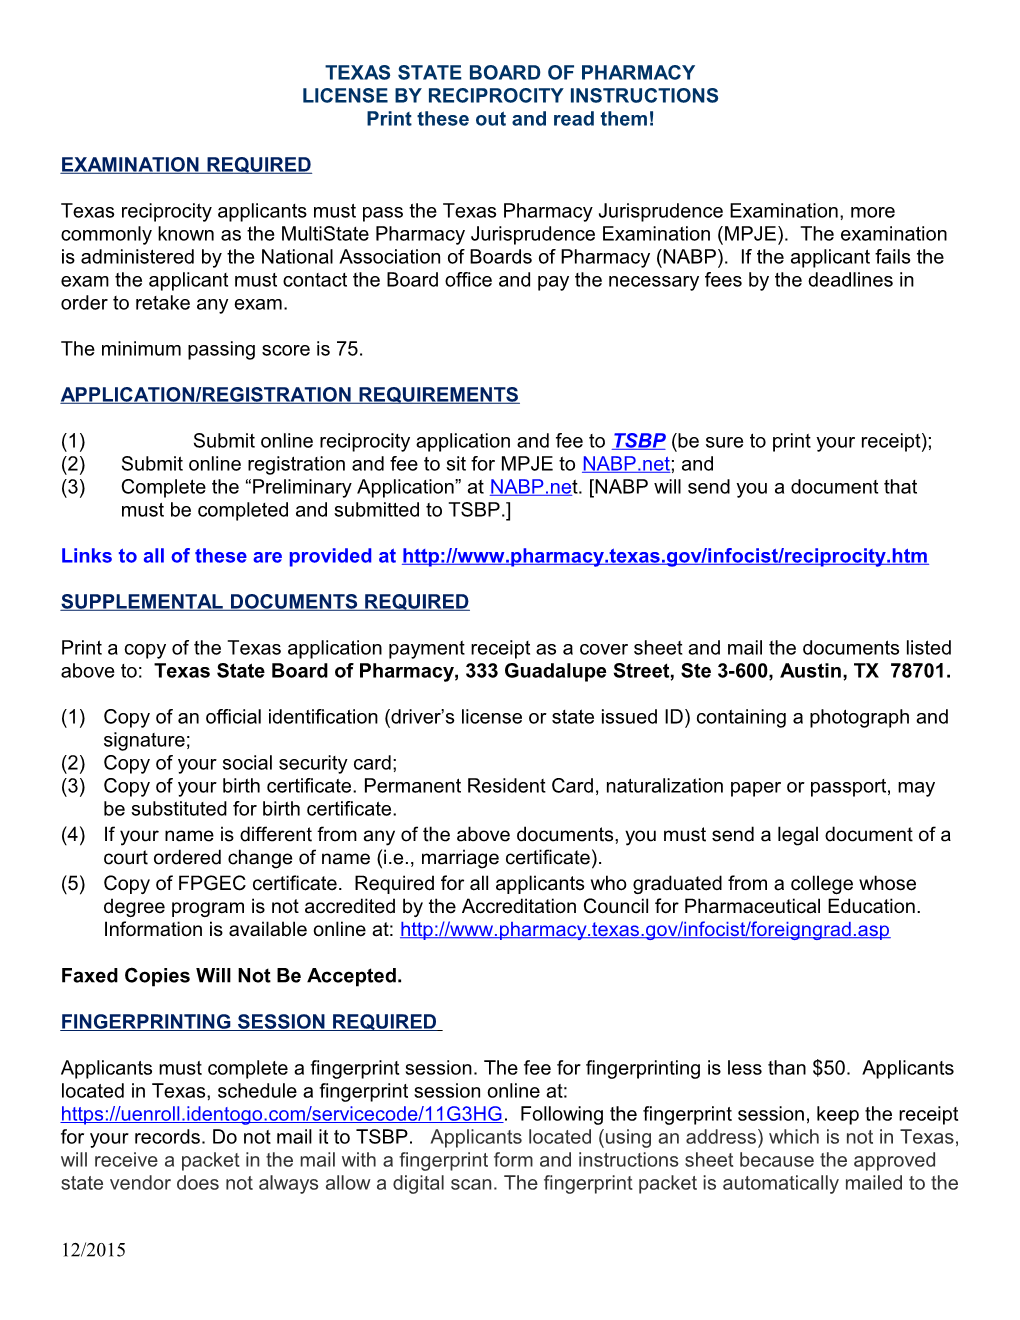 TEXAS STATE BOARD of PHARMACY LICENSE by RECIPROCITYINSTRUCTIONS Print These out and Read